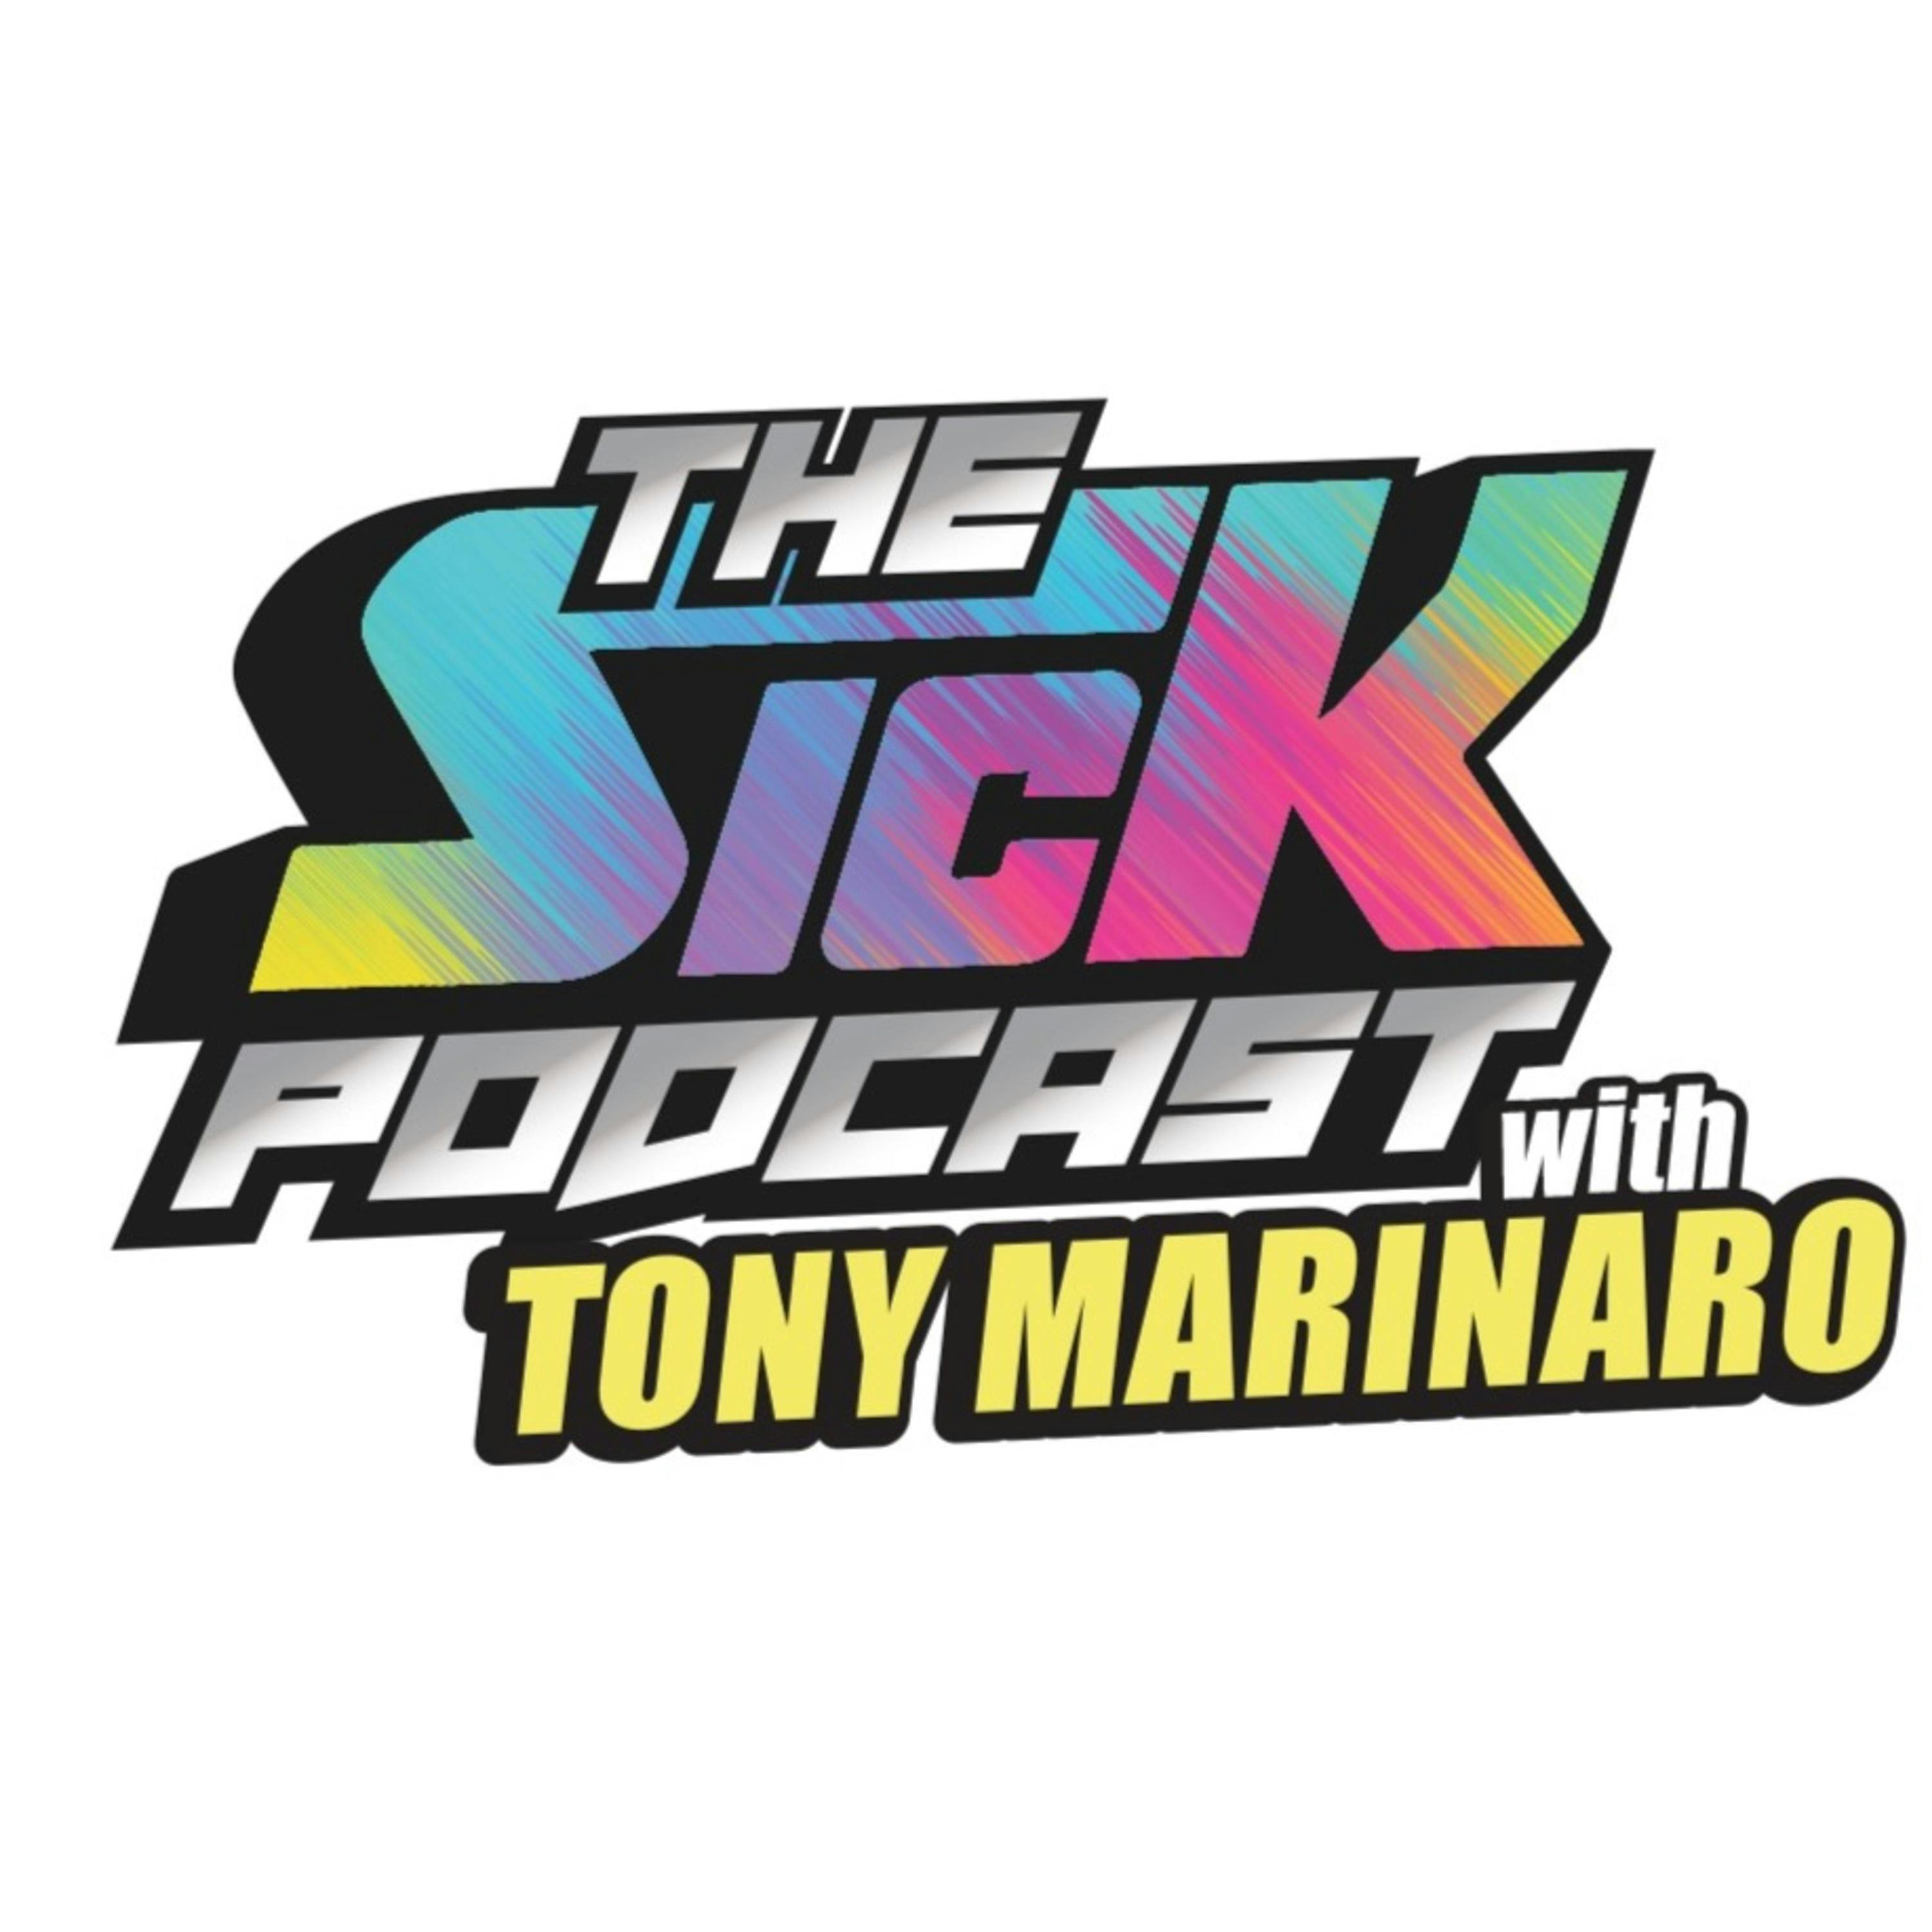 What Cole Caufield's Contract Should Look Like | The Sick Podcast with Tony Marinaro January 16 2022